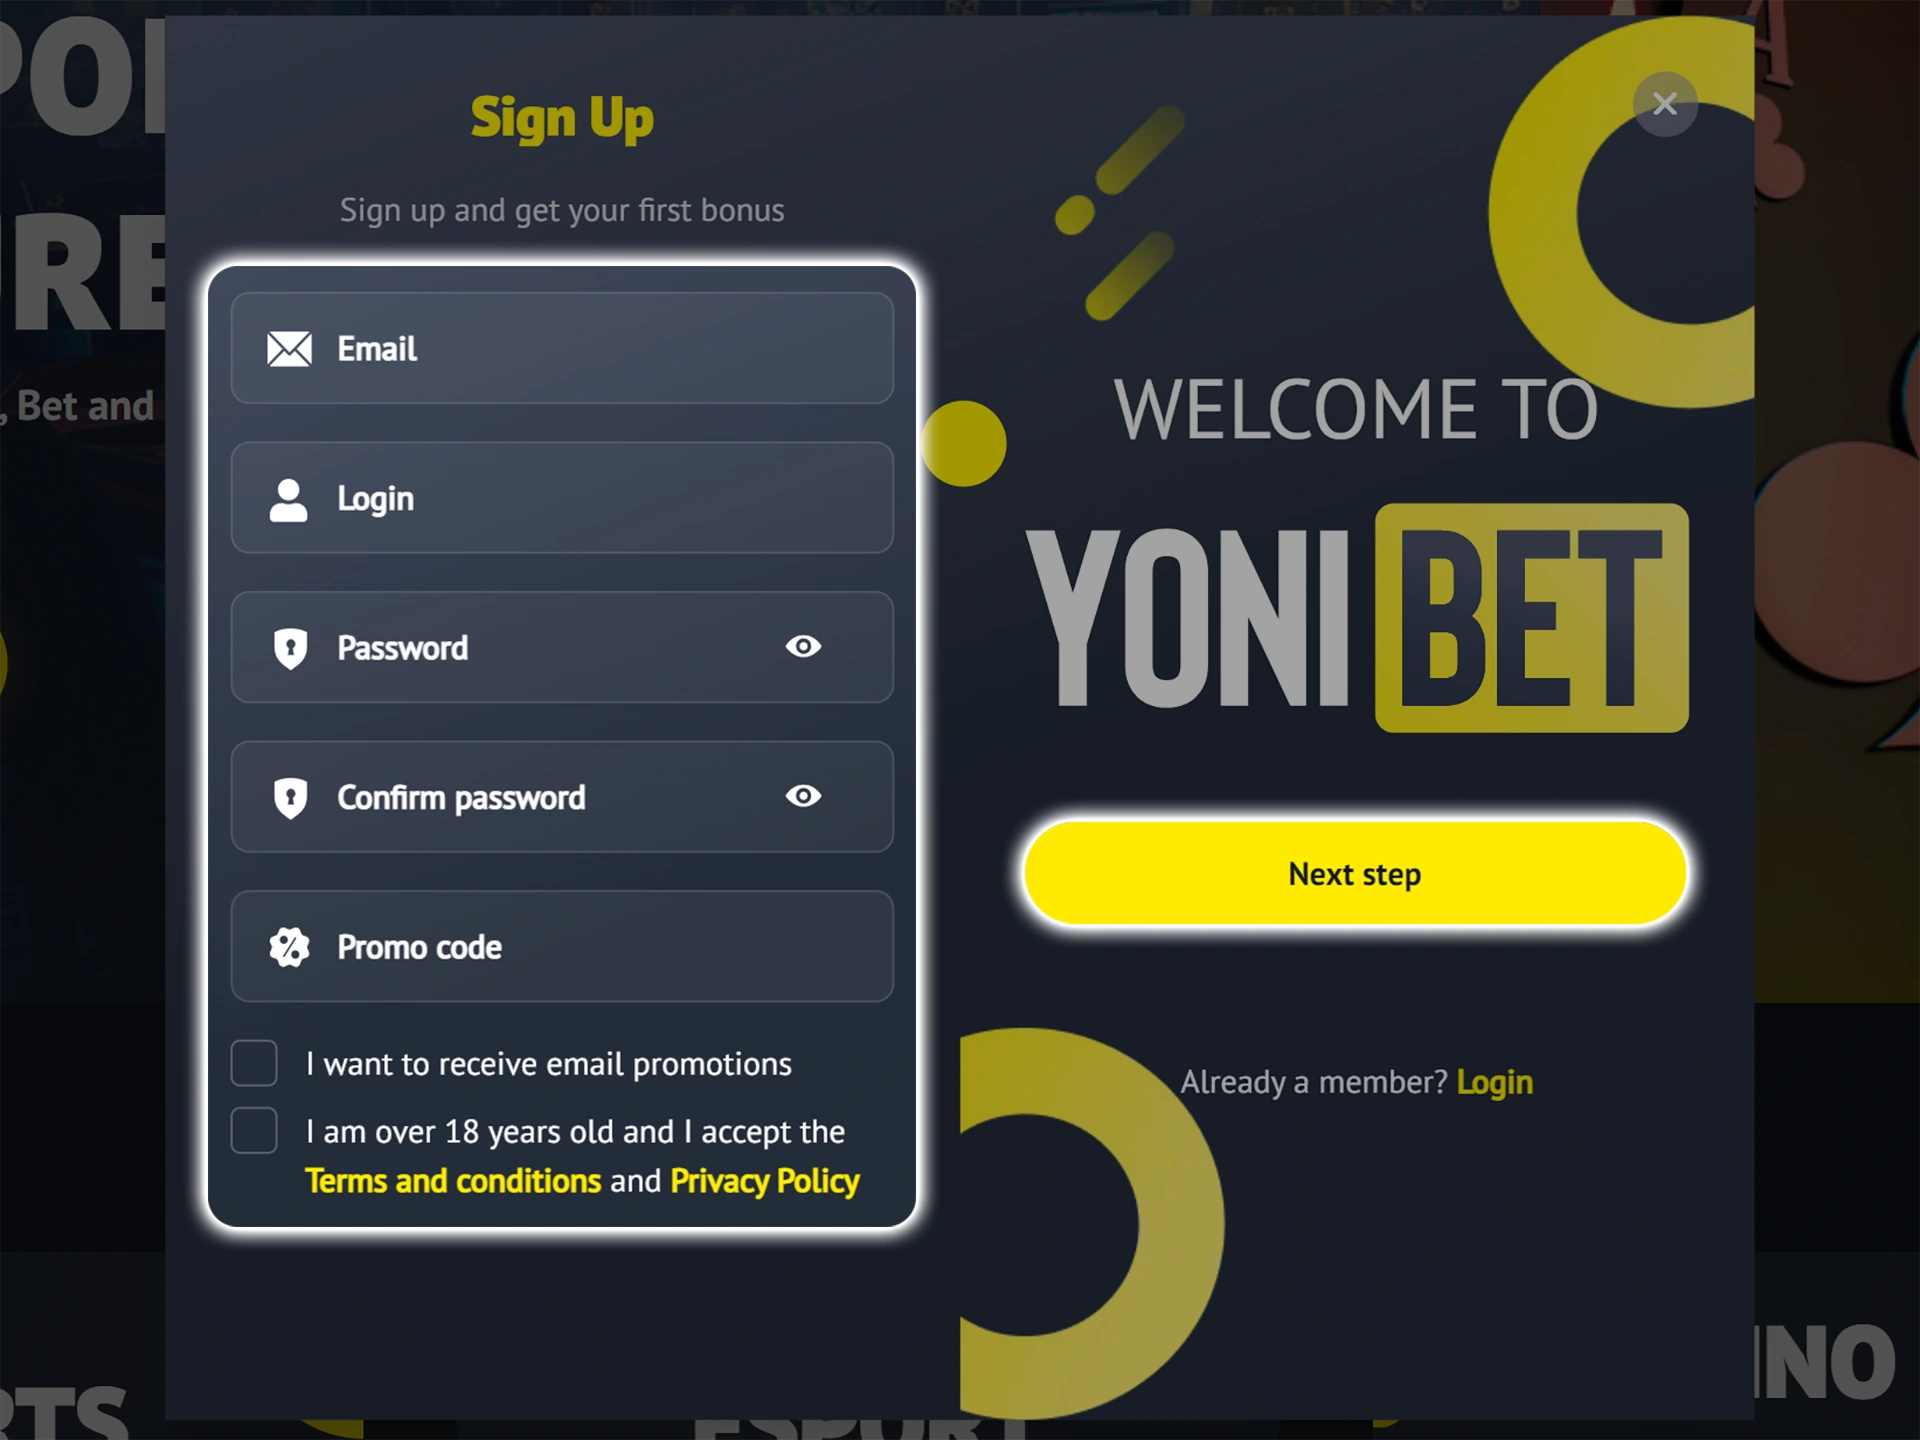 Enter all the information required to create a Yonibet account.